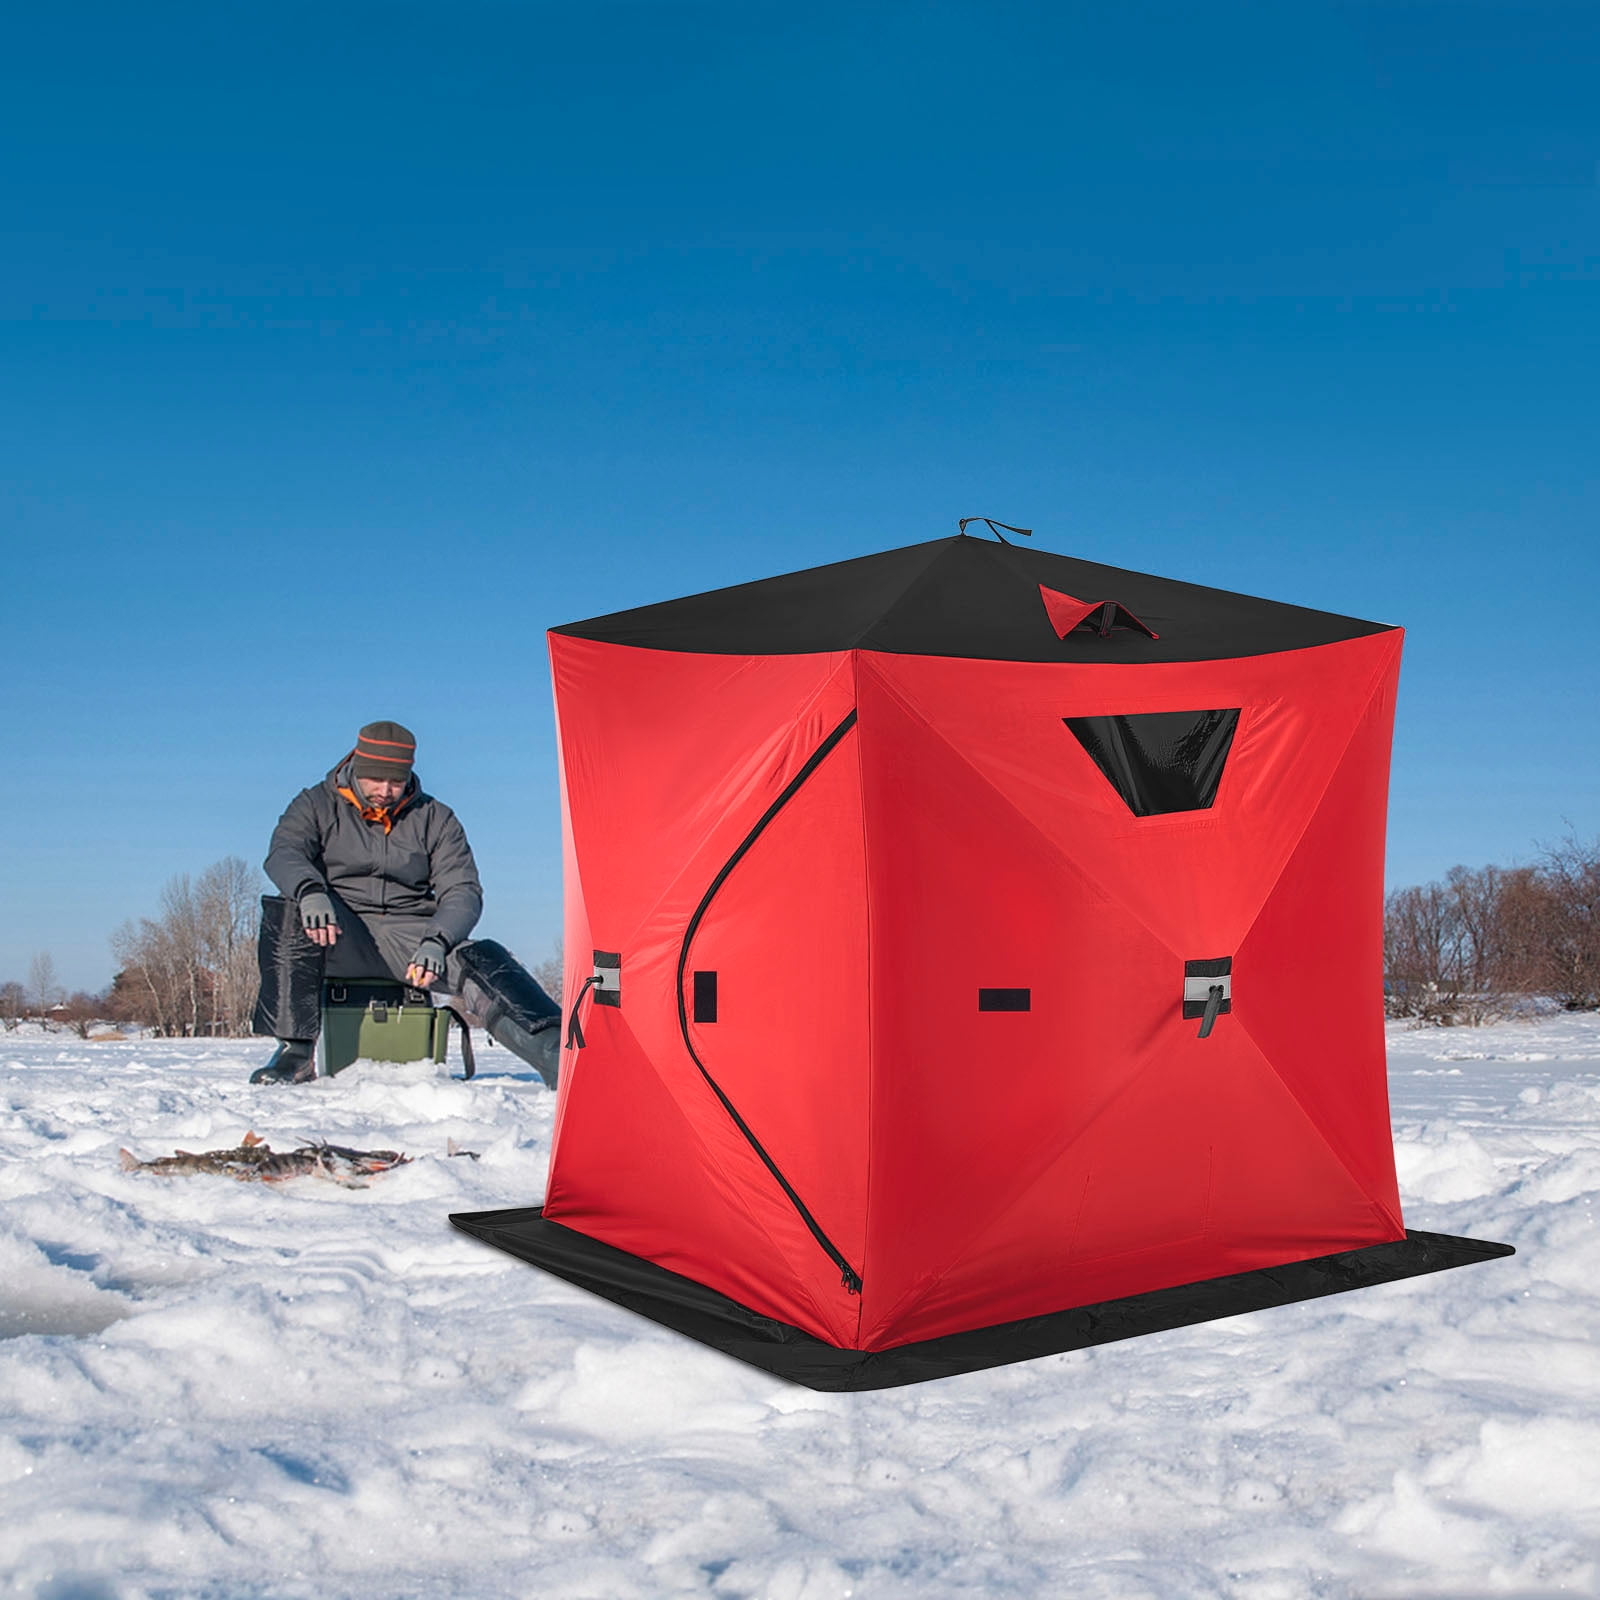 SKYSHALO 2-Person Ice Fishing Shelter Tent Waterproof Pop-up Carrying  Bag,Red